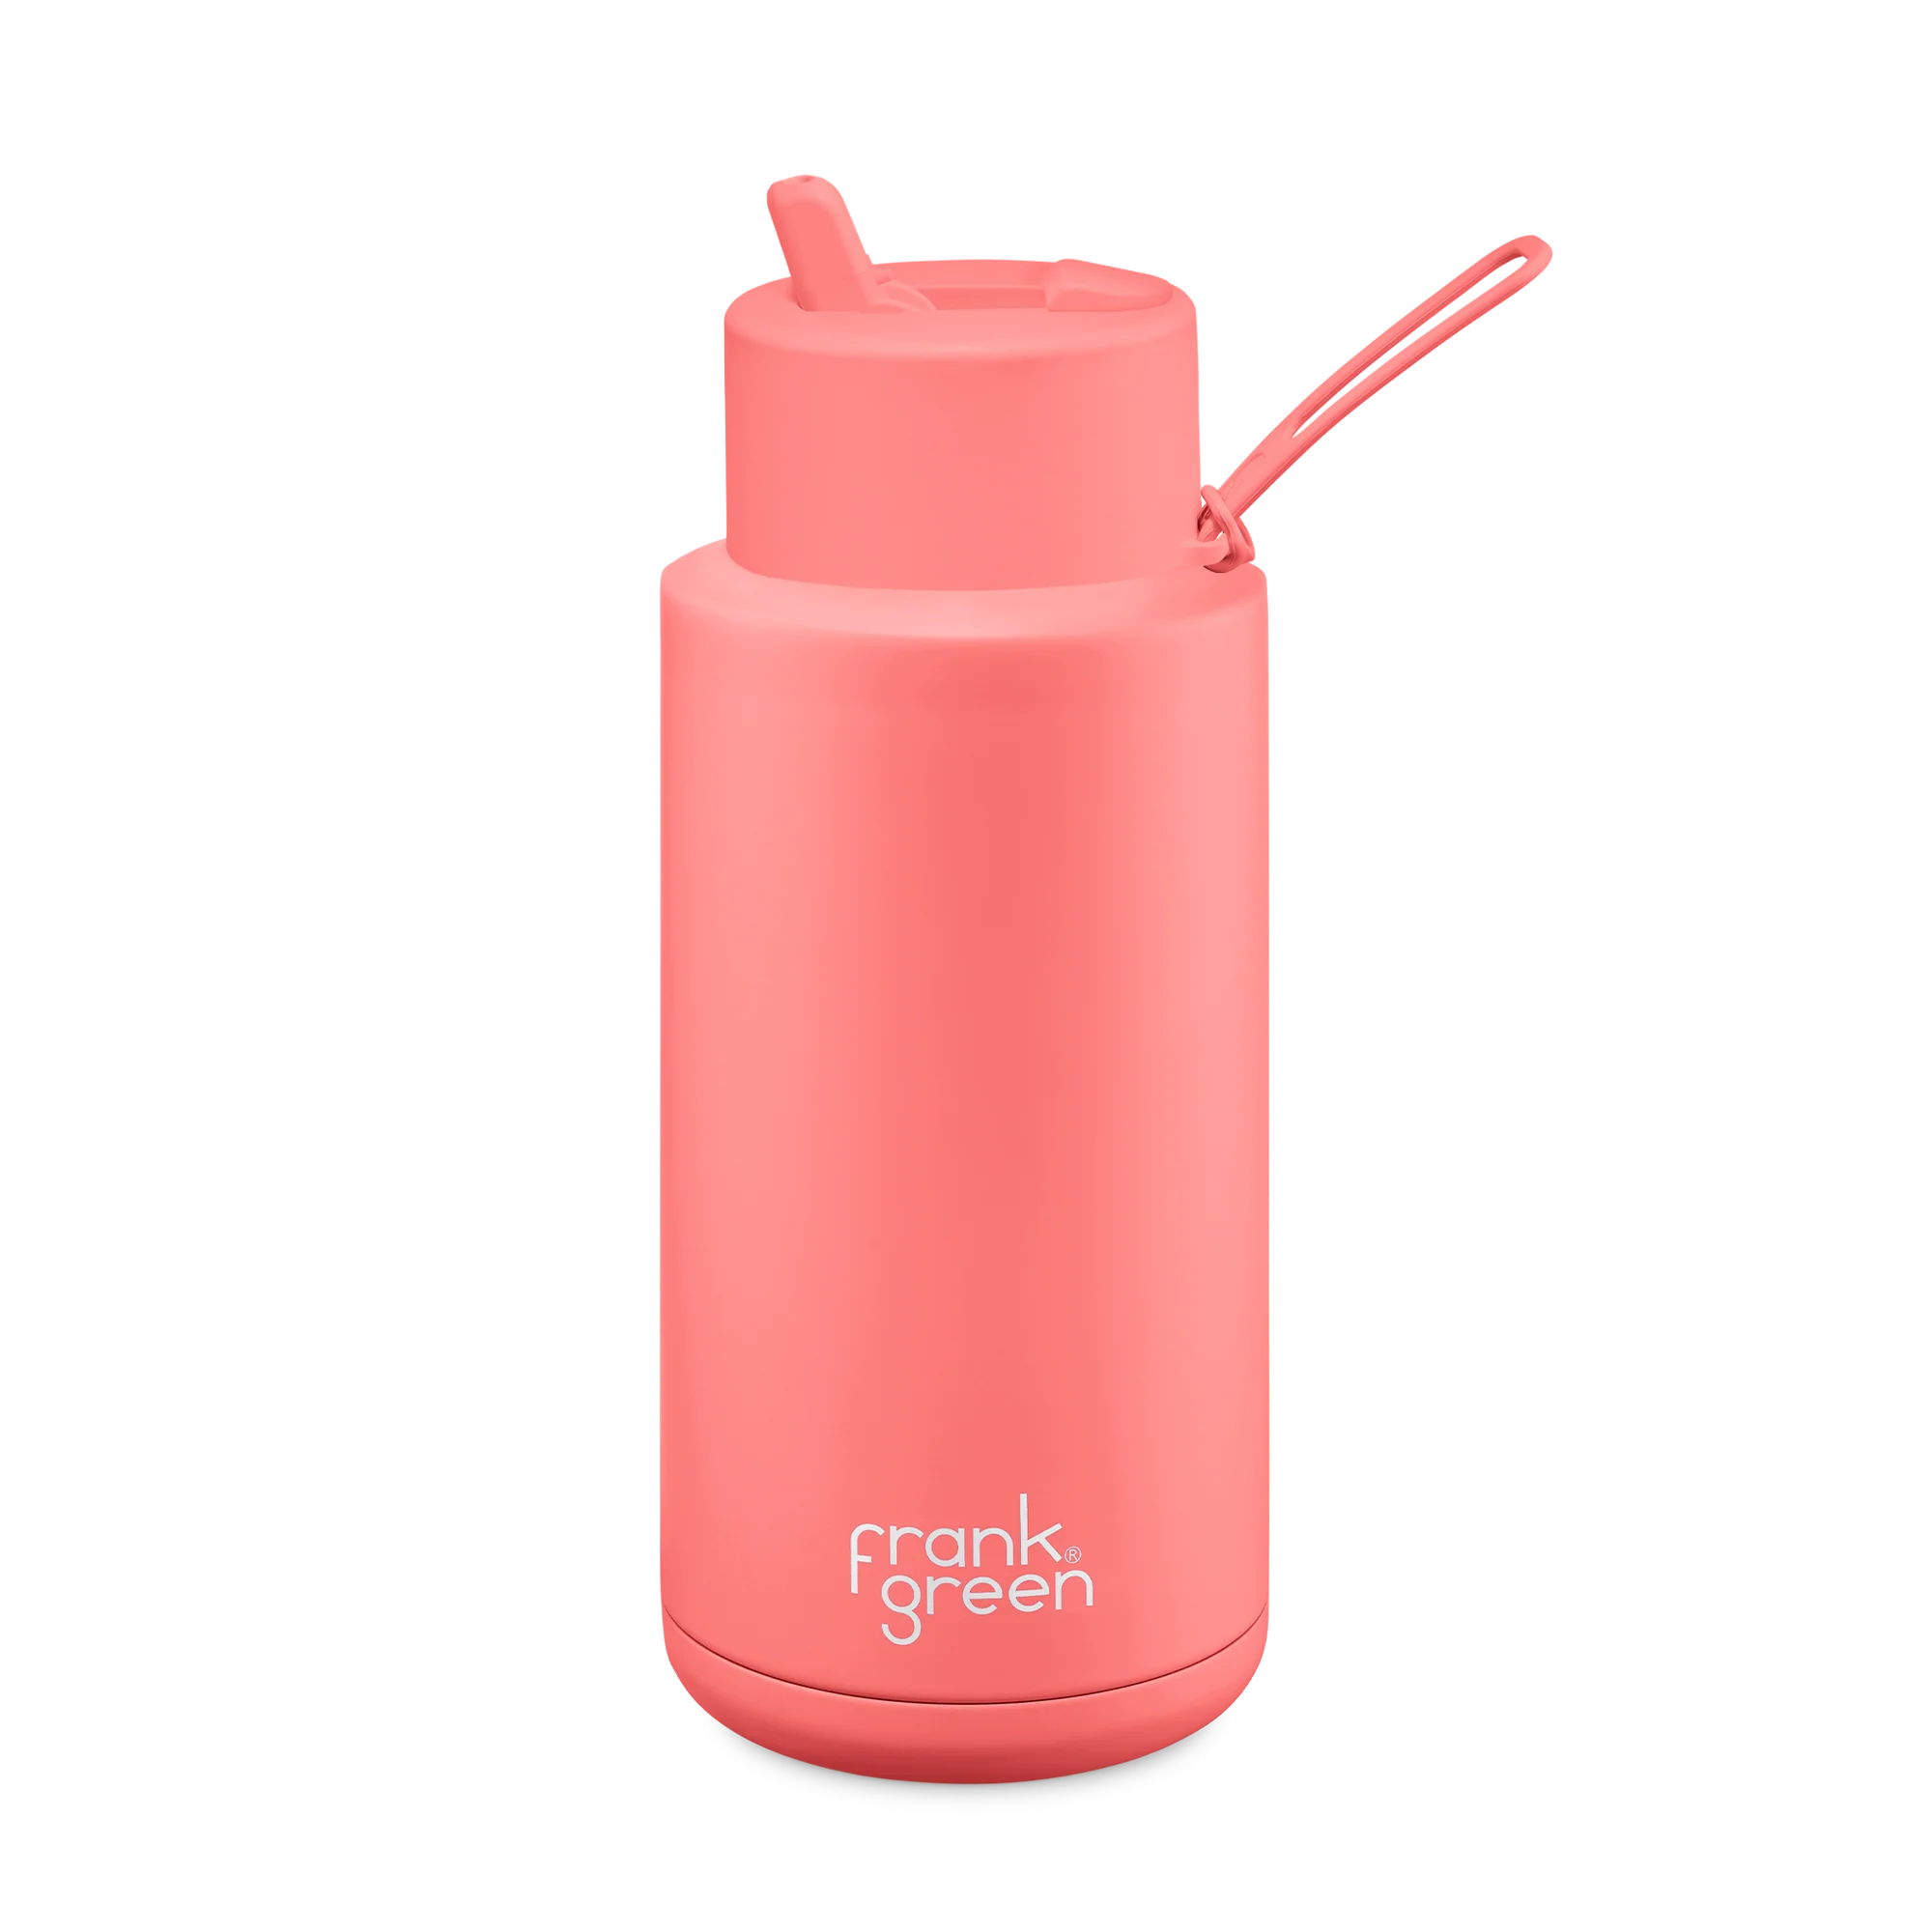 Frank Green Stainless Steel Ceramic Reusable Bottle Sweat Peach With Straw And Strap 34oz/1,000ml